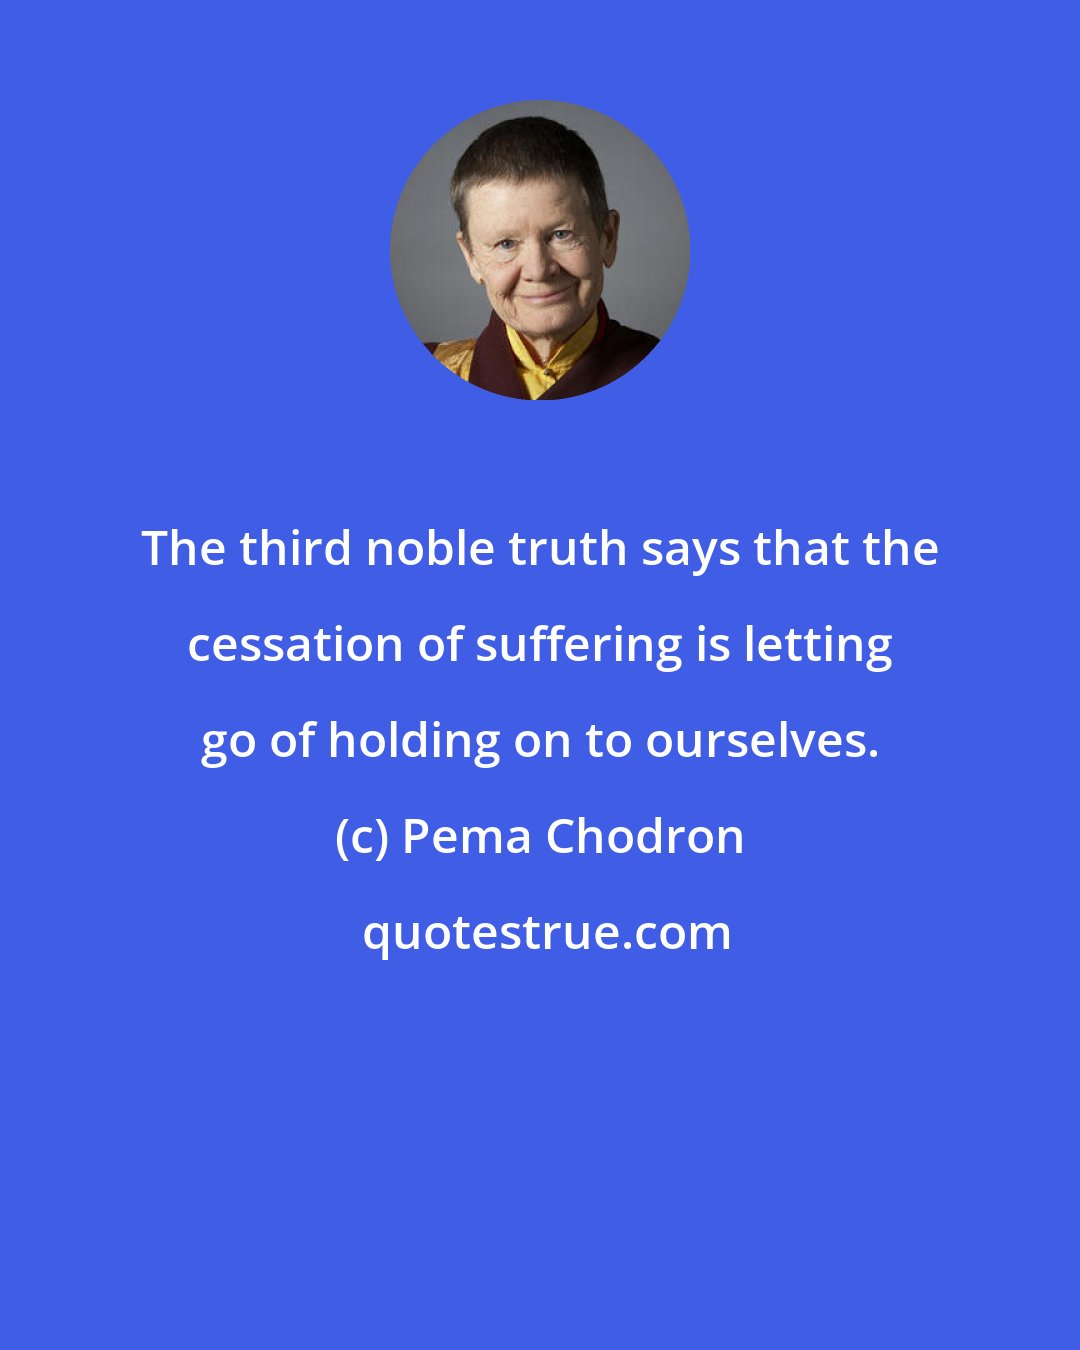 Pema Chodron: The third noble truth says that the cessation of suffering is letting go of holding on to ourselves.